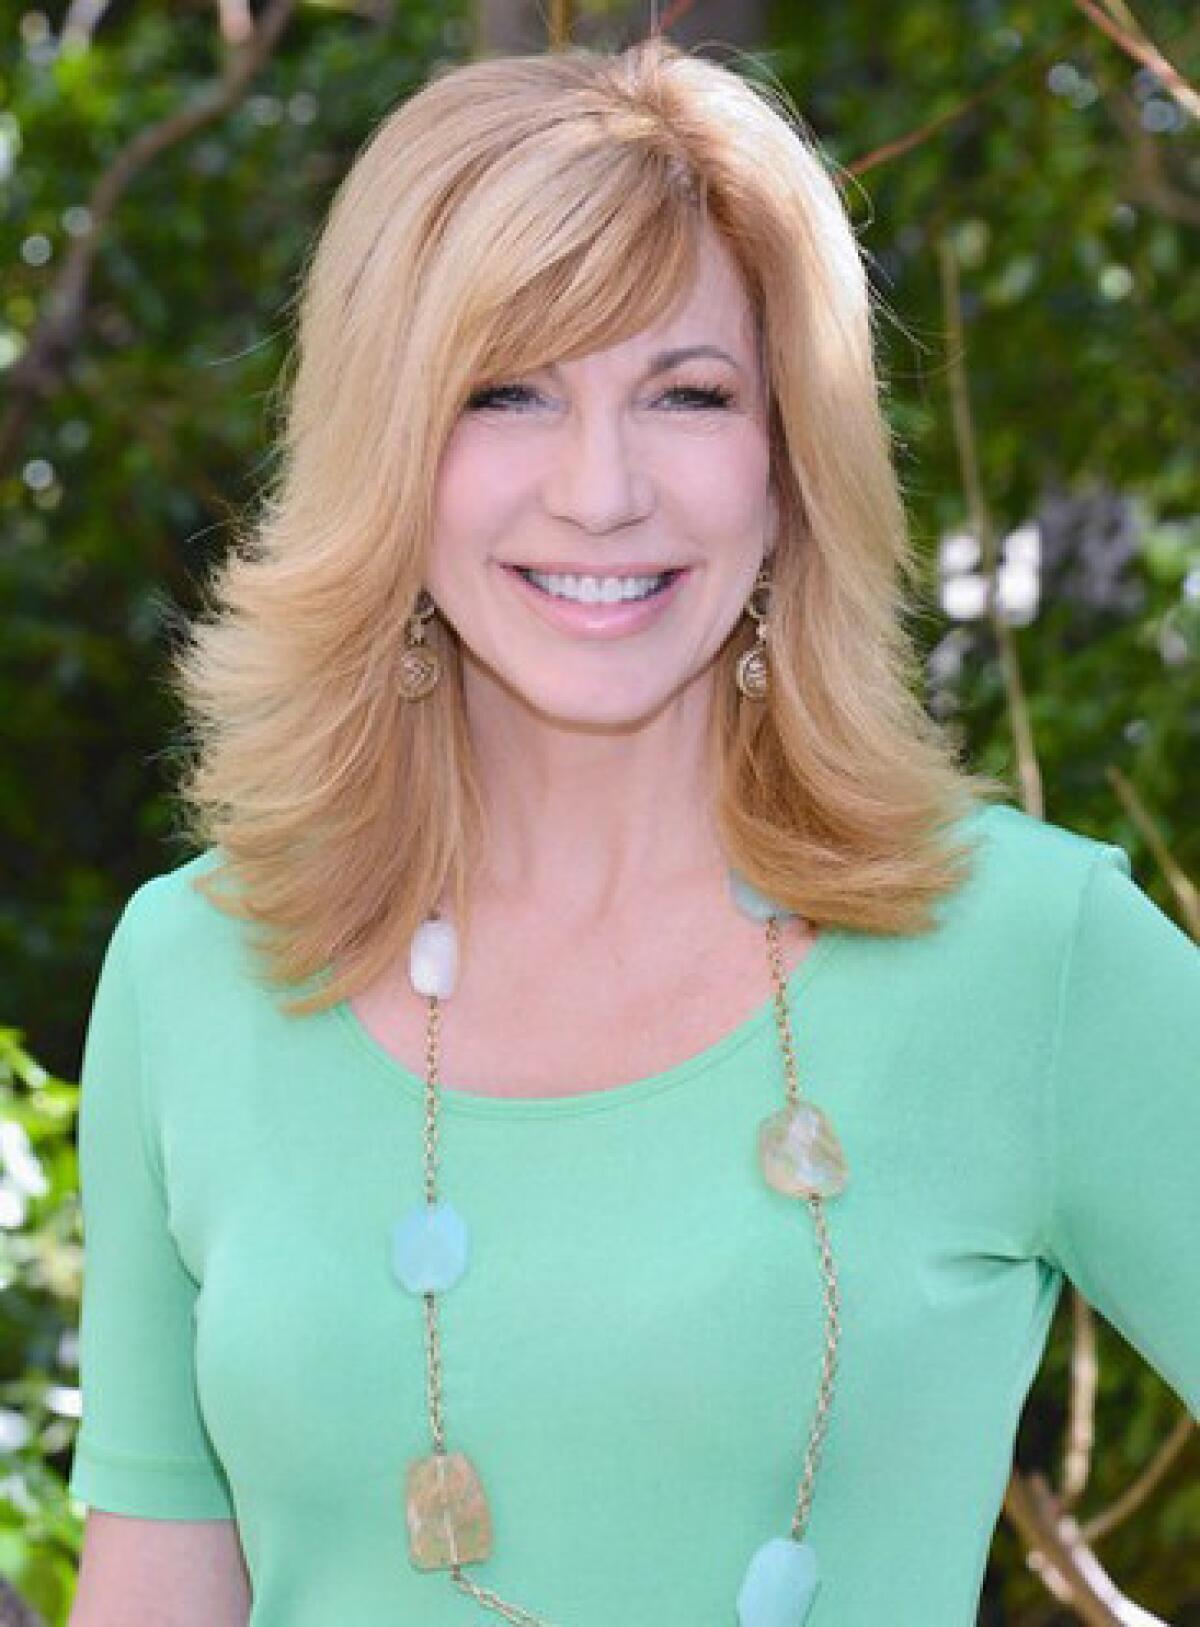 TV host Leeza Gibbons has a new book out, "Take 2: Your Guide to Creating Happy Endings and New Beginnings."